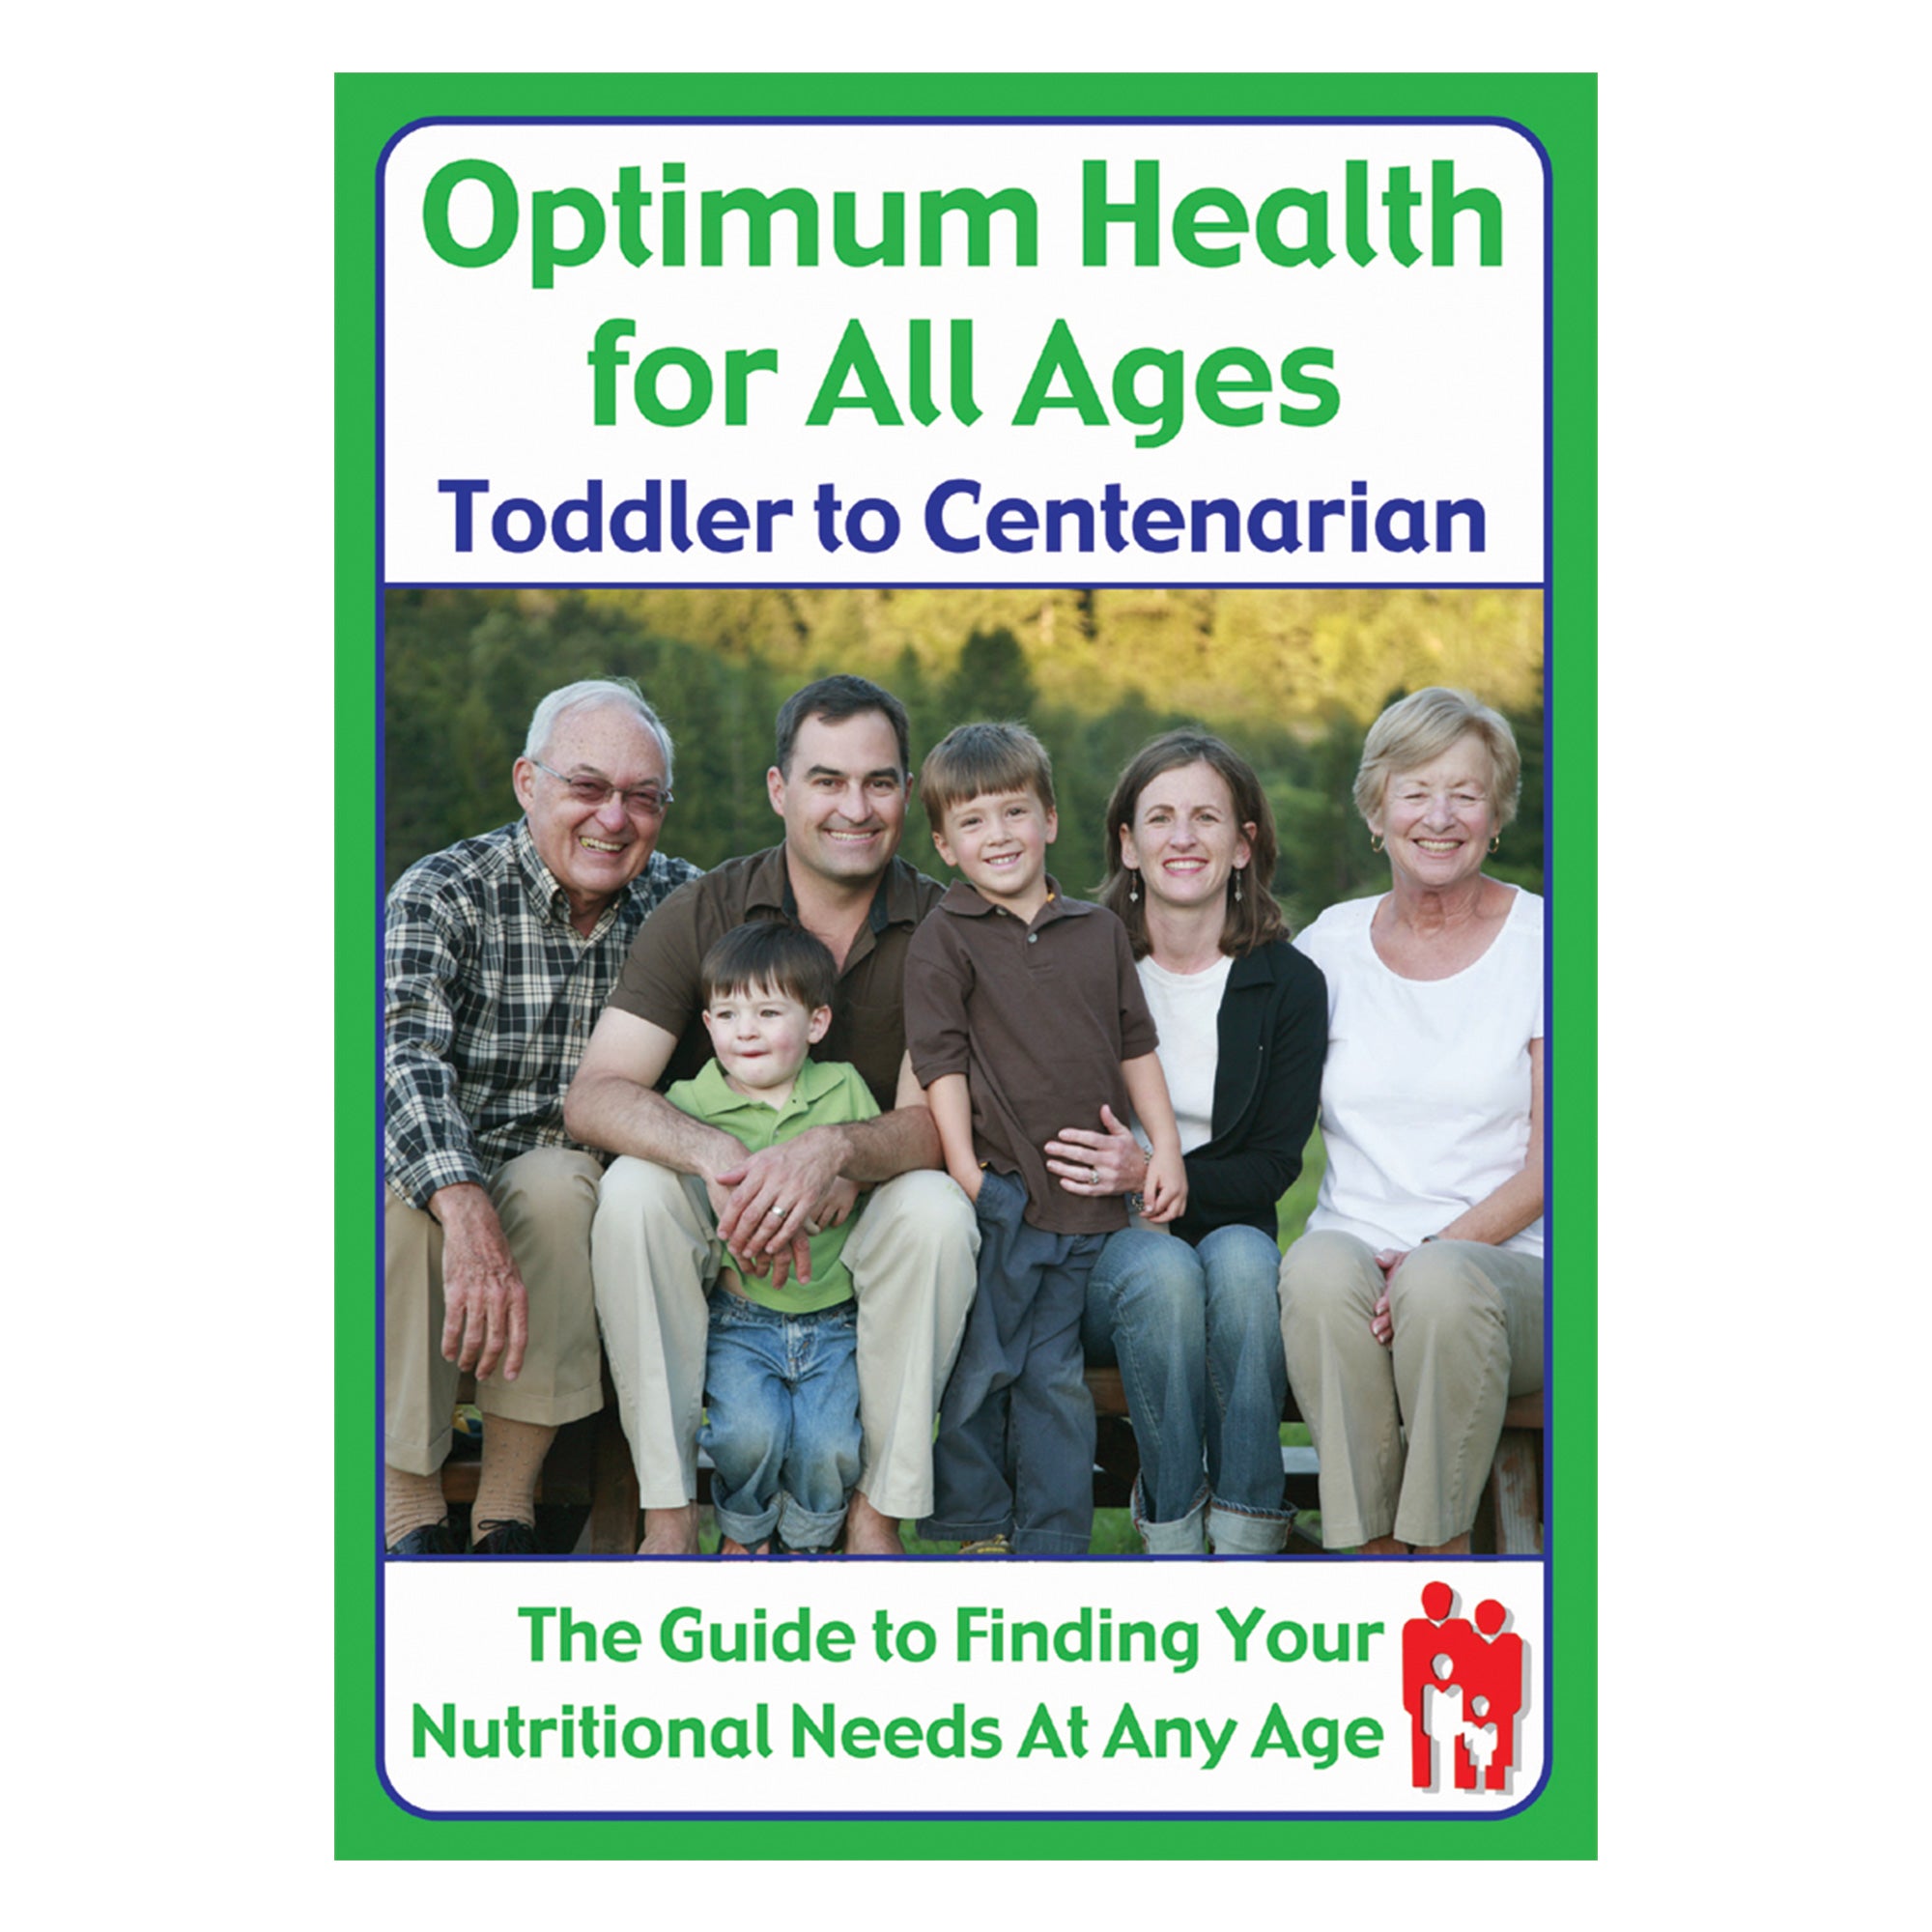 Optimum Health for All Ages